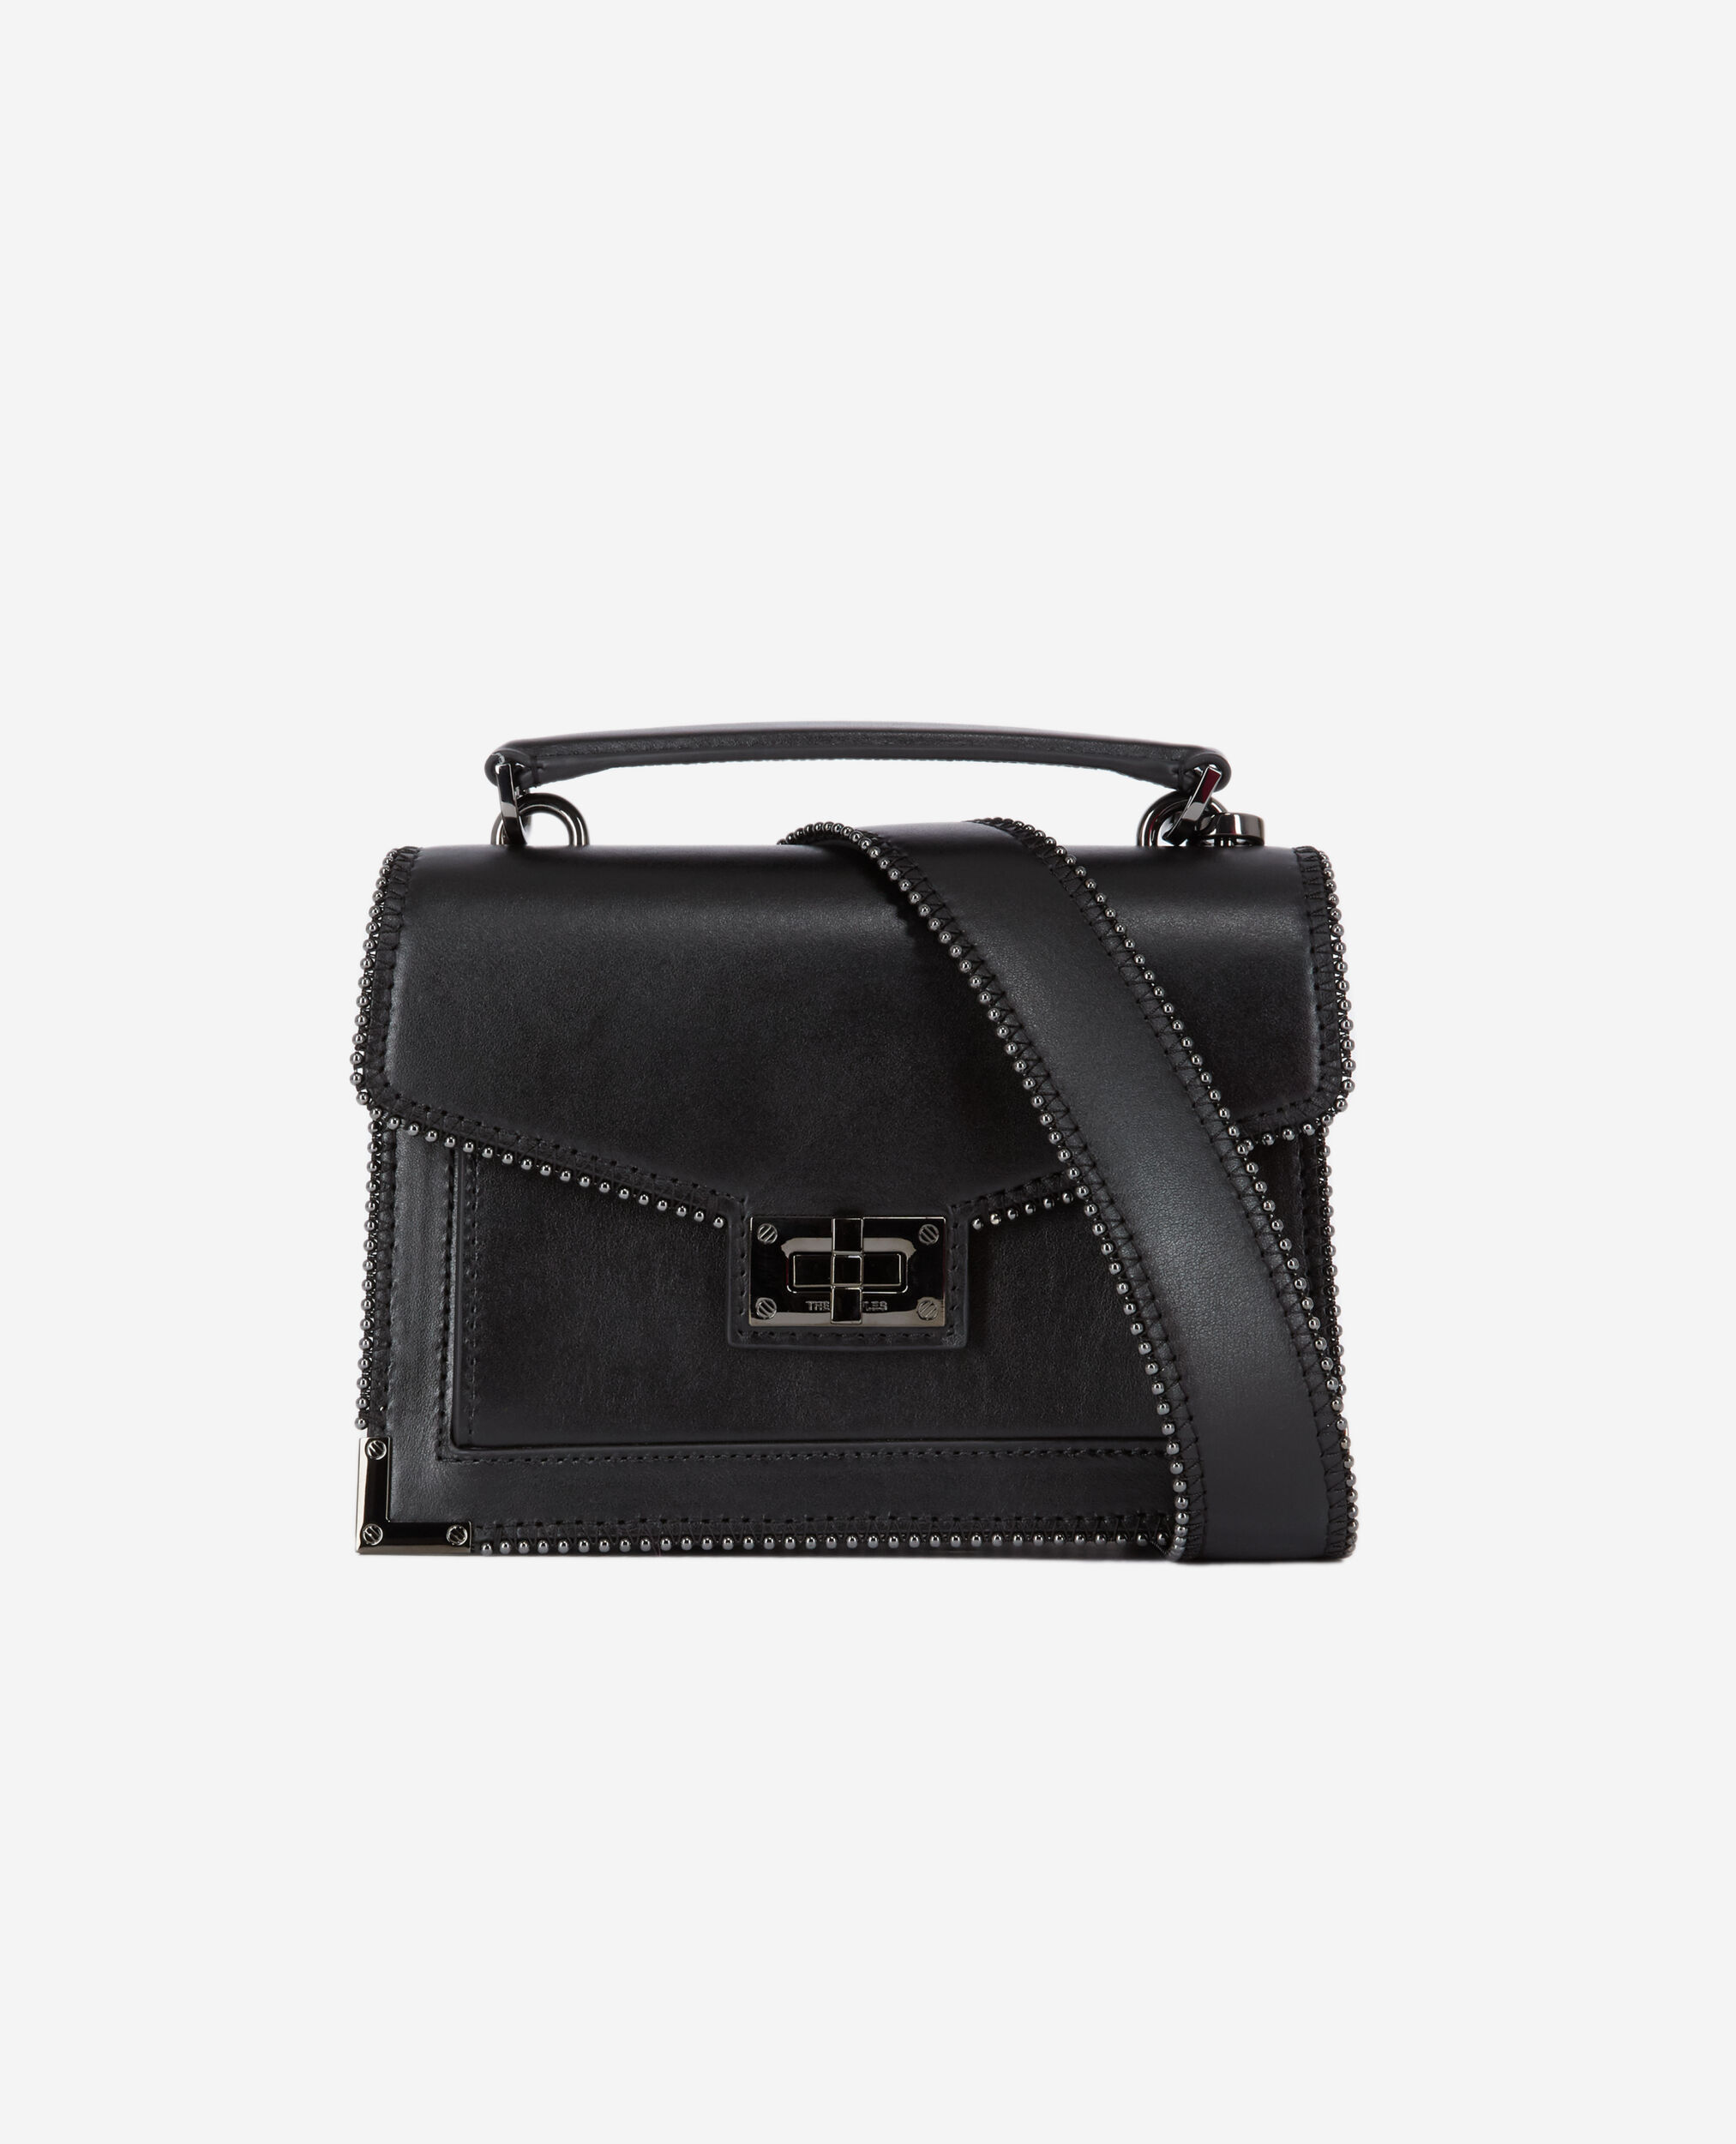 Small Emily bag in black leather, BLACK, hi-res image number null